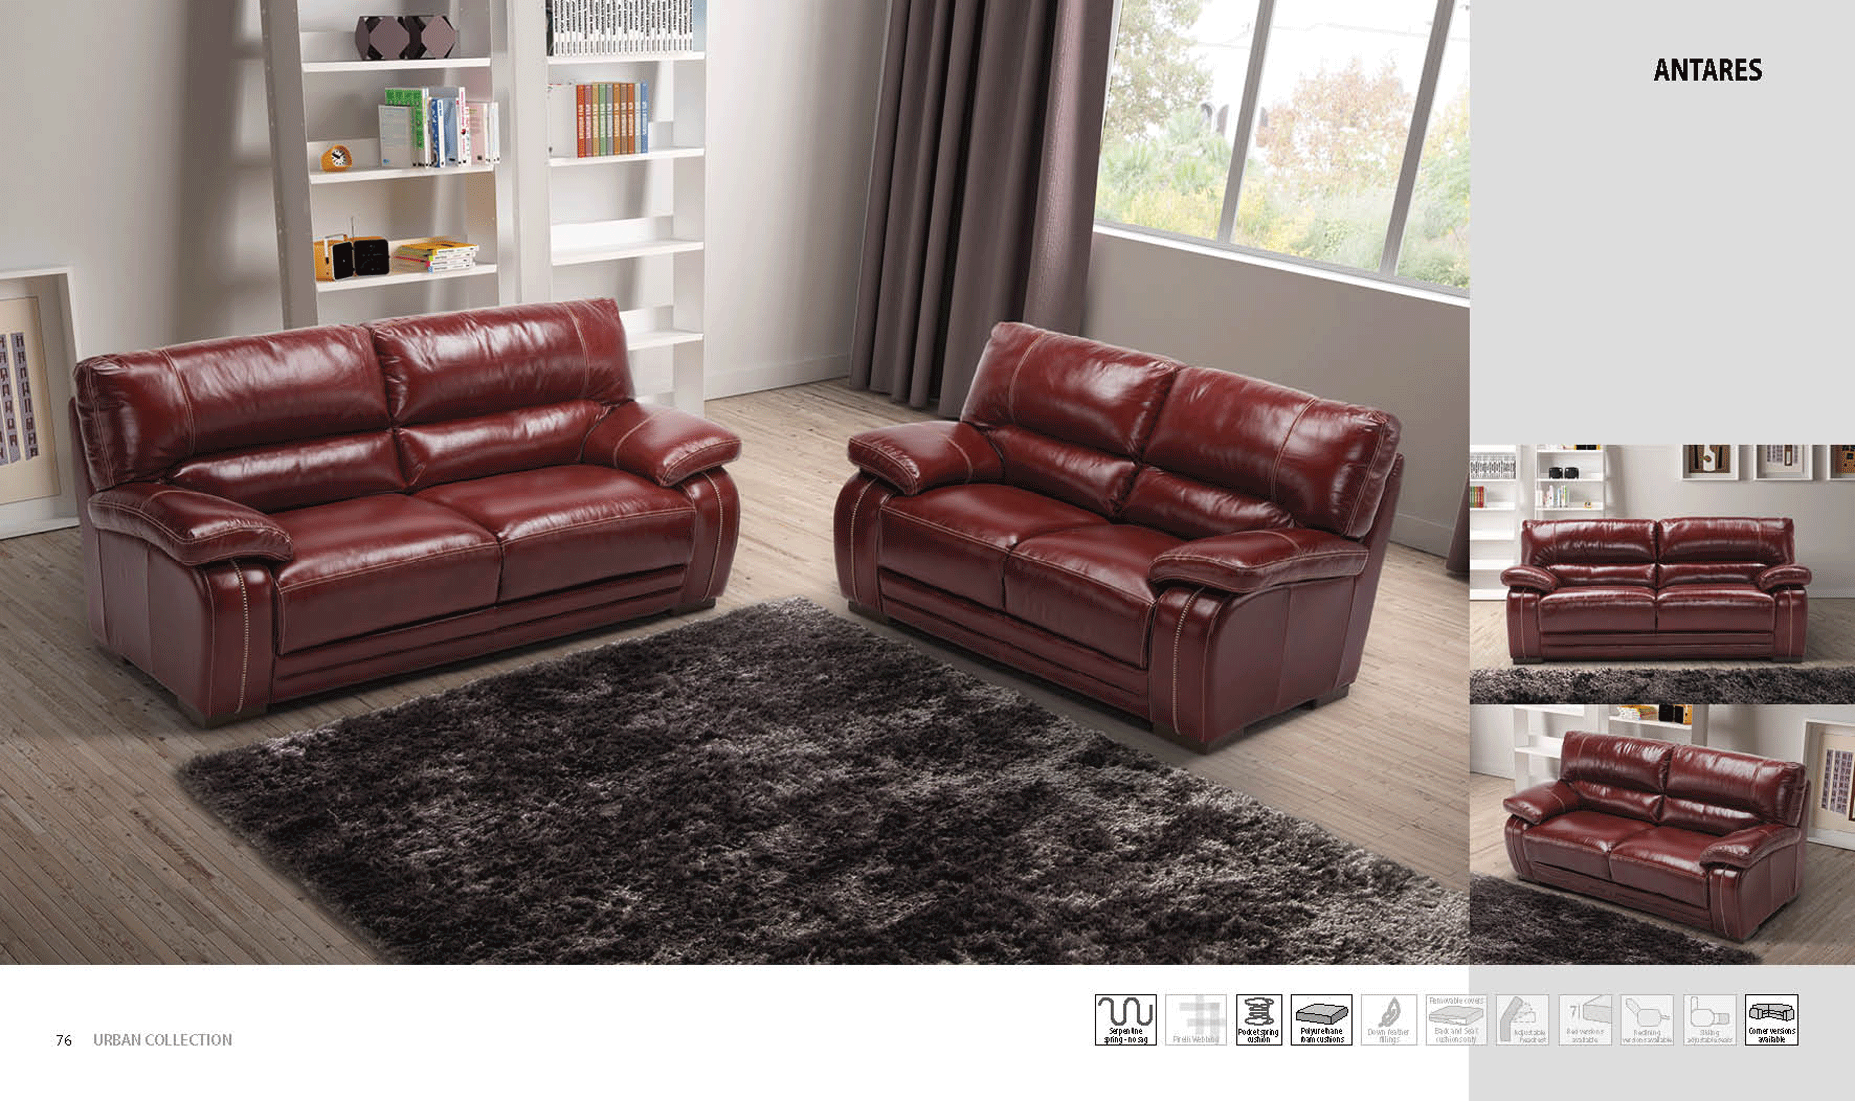 Living Room Furniture New Trend Concepts Urban Living Room Collection Antares